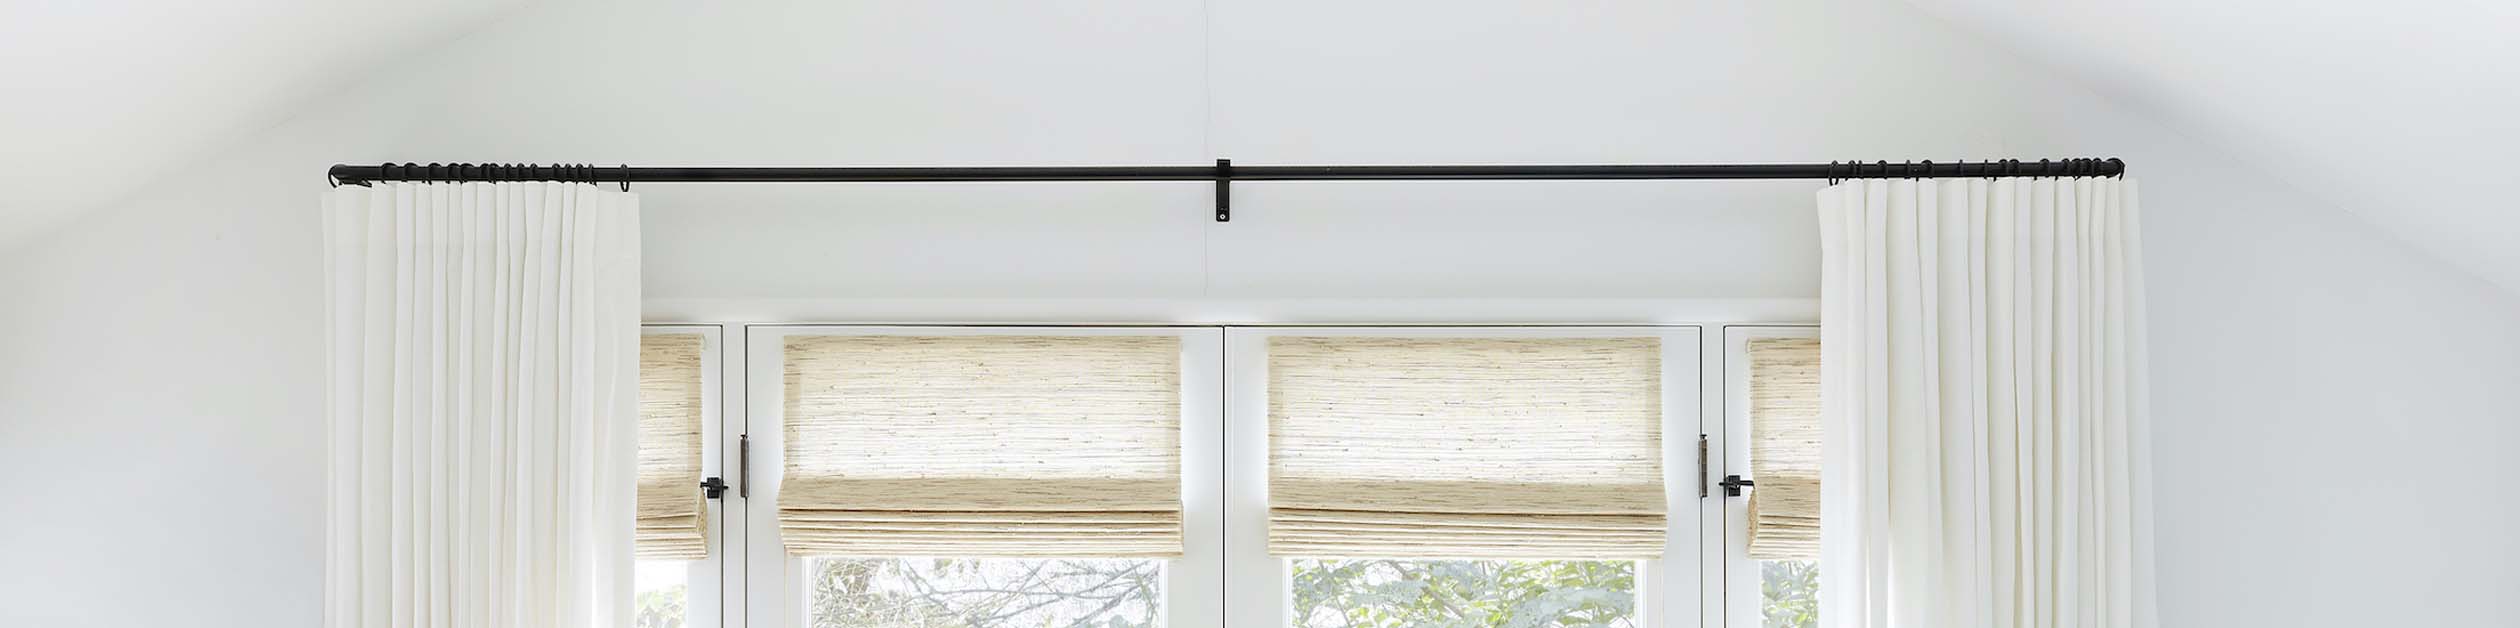 Reduce Shipping Costs for Longer Curtain Rod Installations